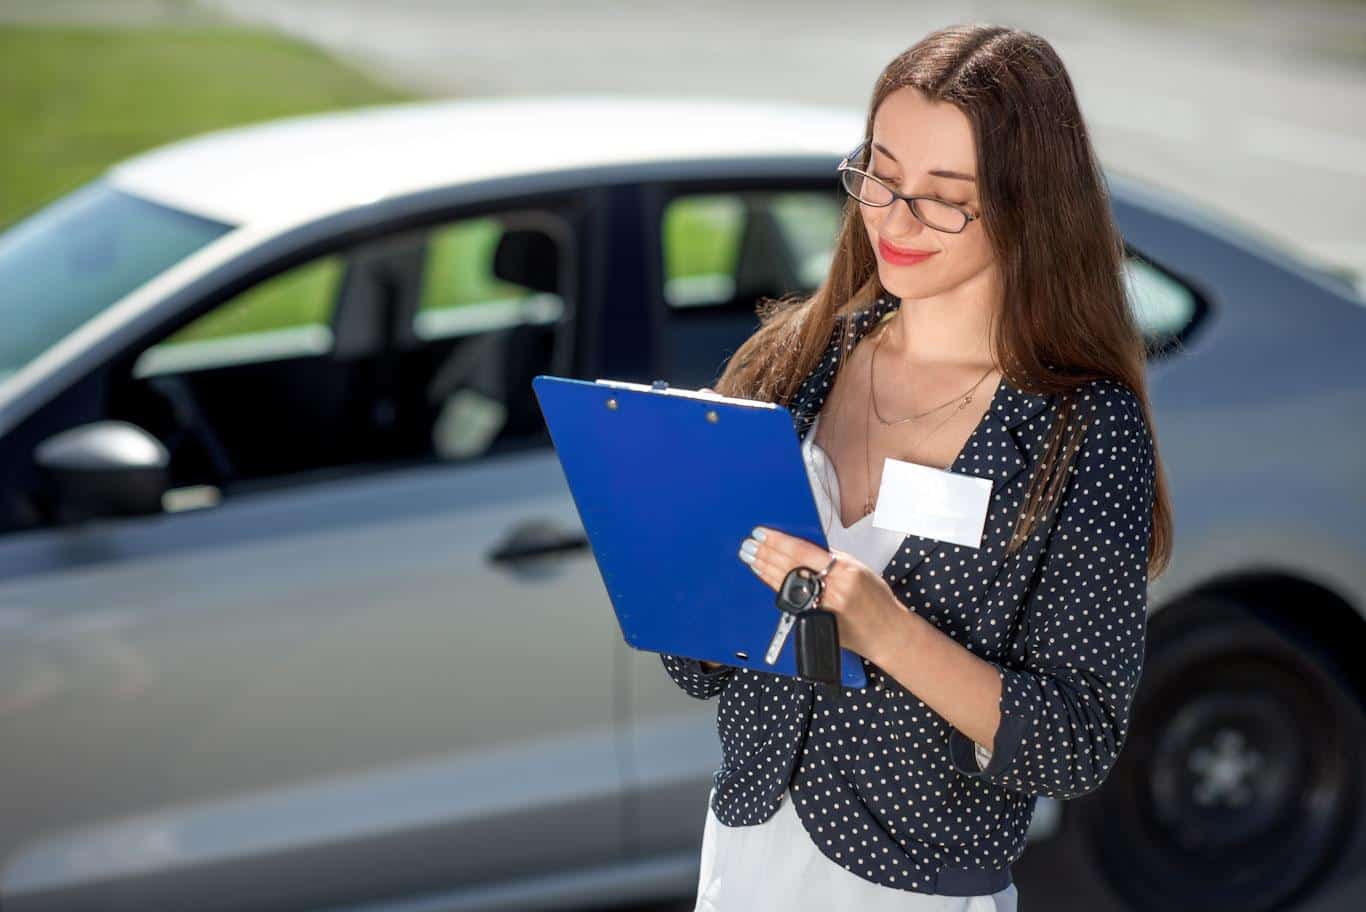 Get your vehicle condition report template from 1streporting.com.